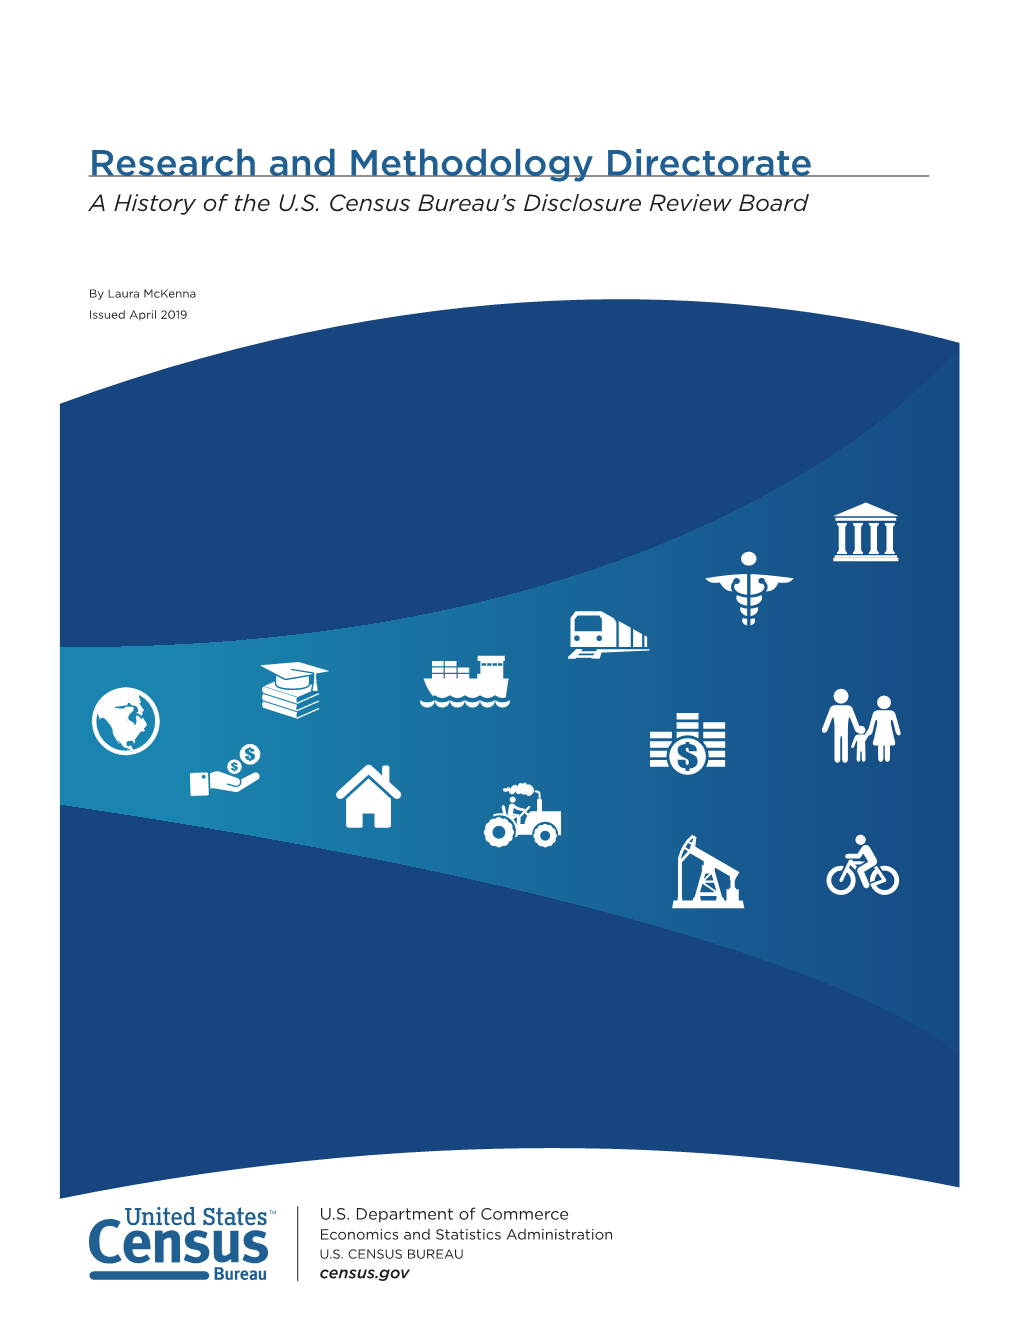 Research and Methodology Directorate a History of the U.S